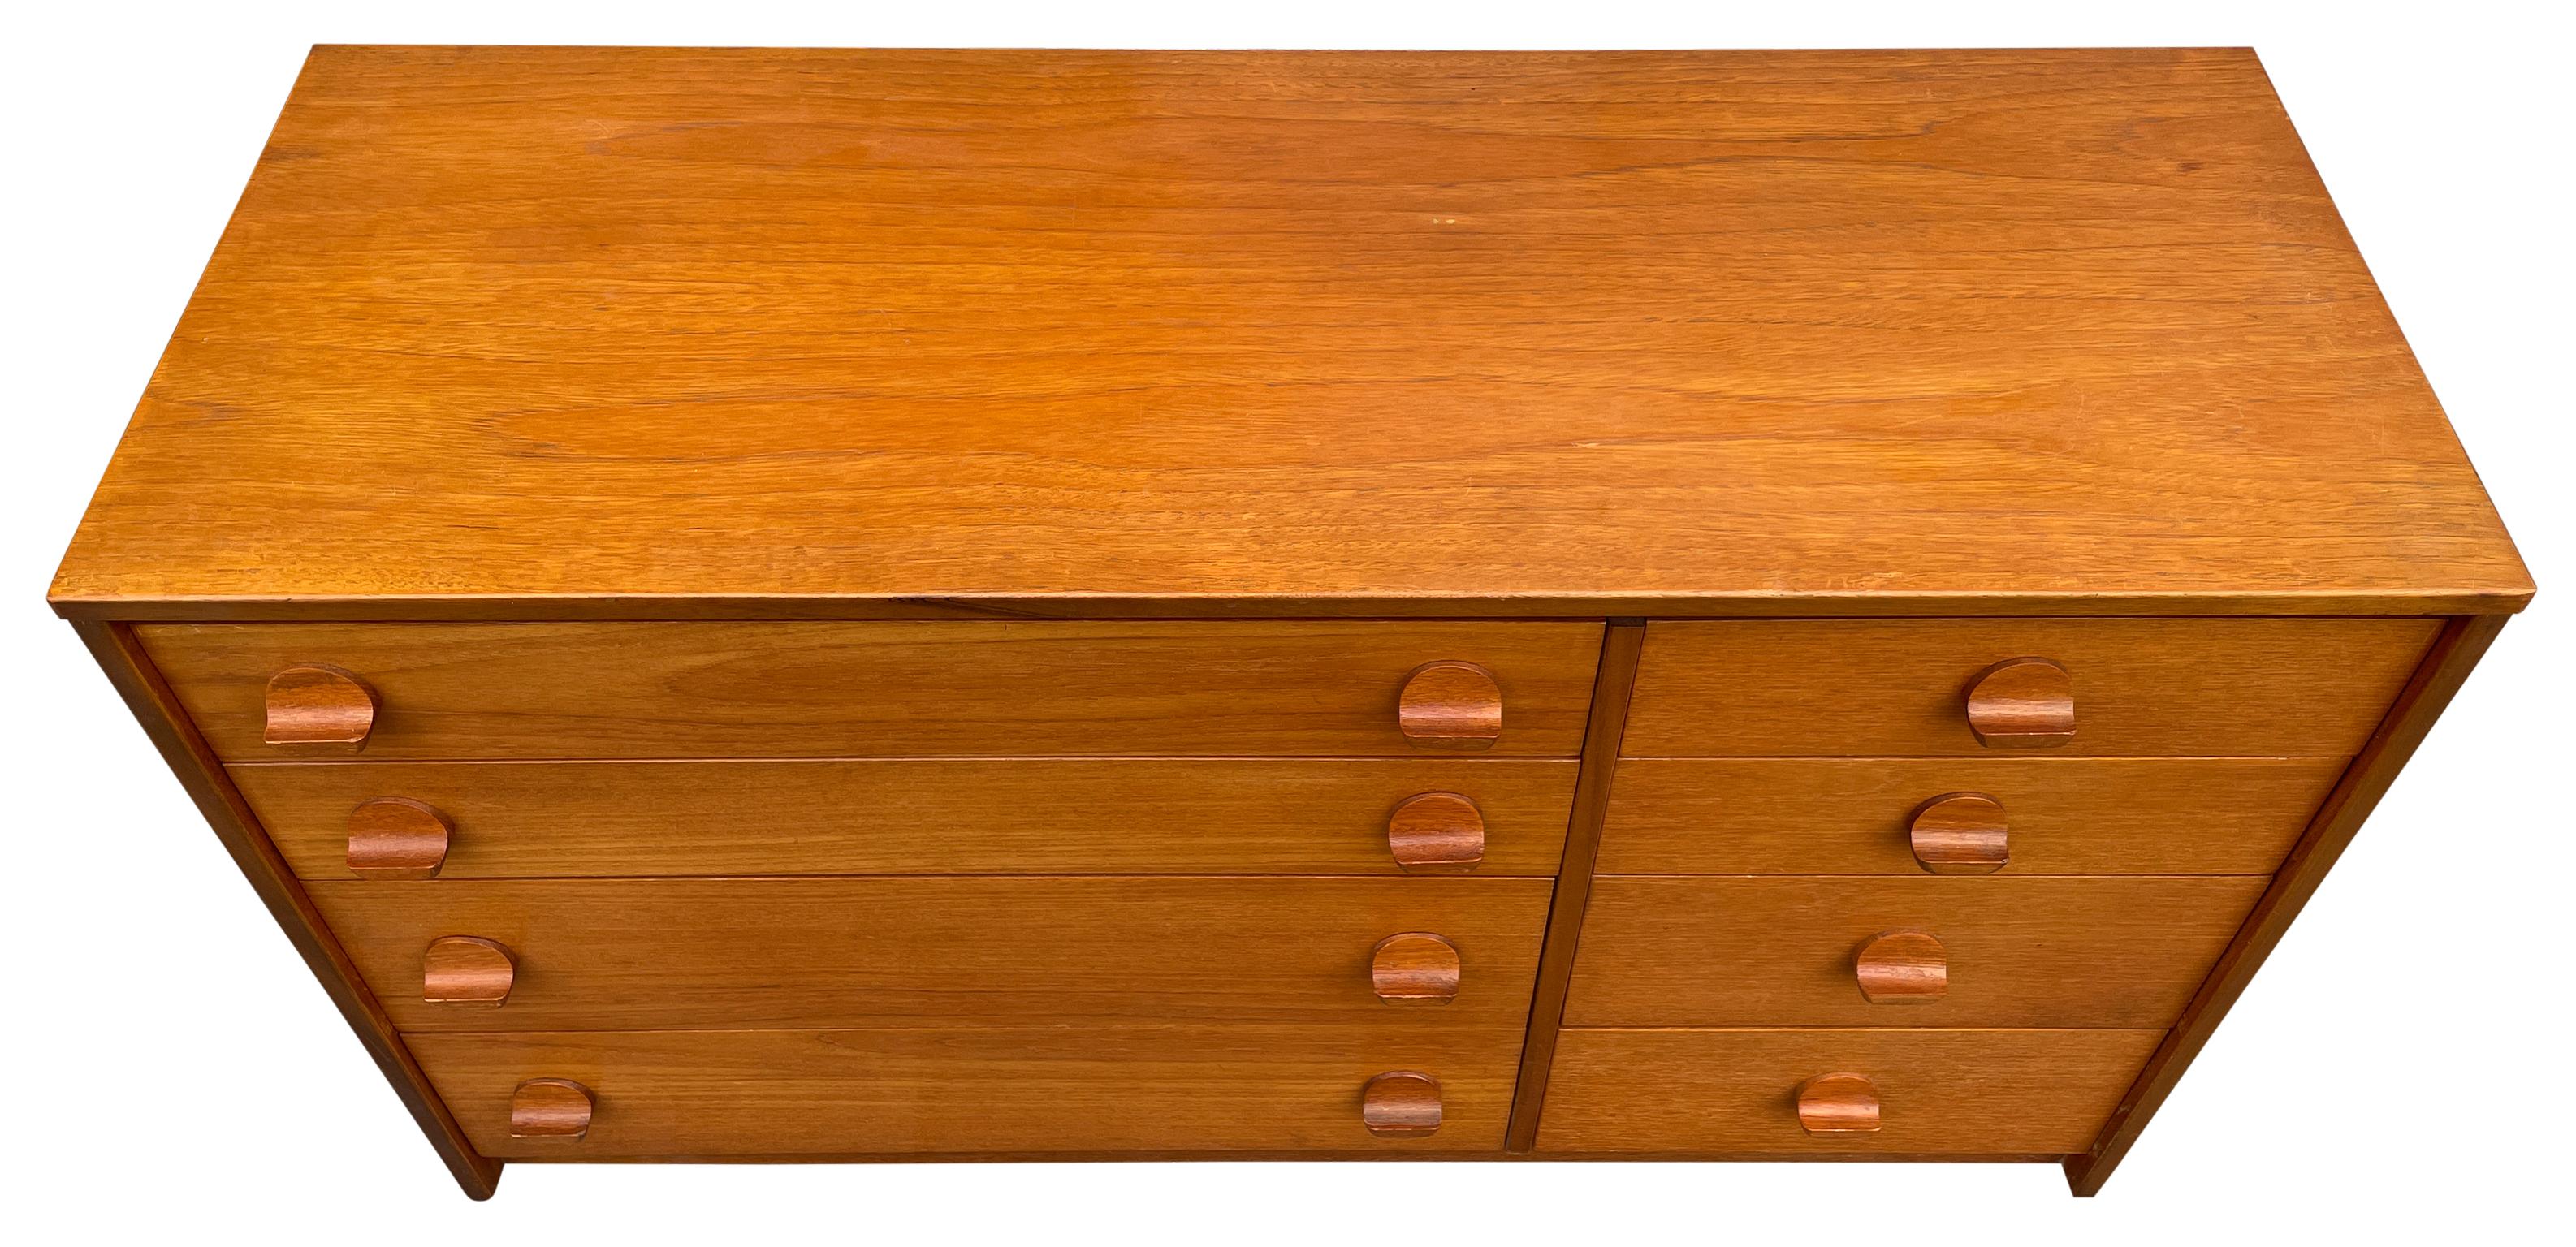 Mid Century small Scandinavian Modern Teak Low 8 drawer asymmetrical dresser by Stag. Beautiful designed Low Dresser or Credenza - dark teak wood Veneer with sculpted teak handles. Sits low on the ground with a flat base. Clean Inside and out